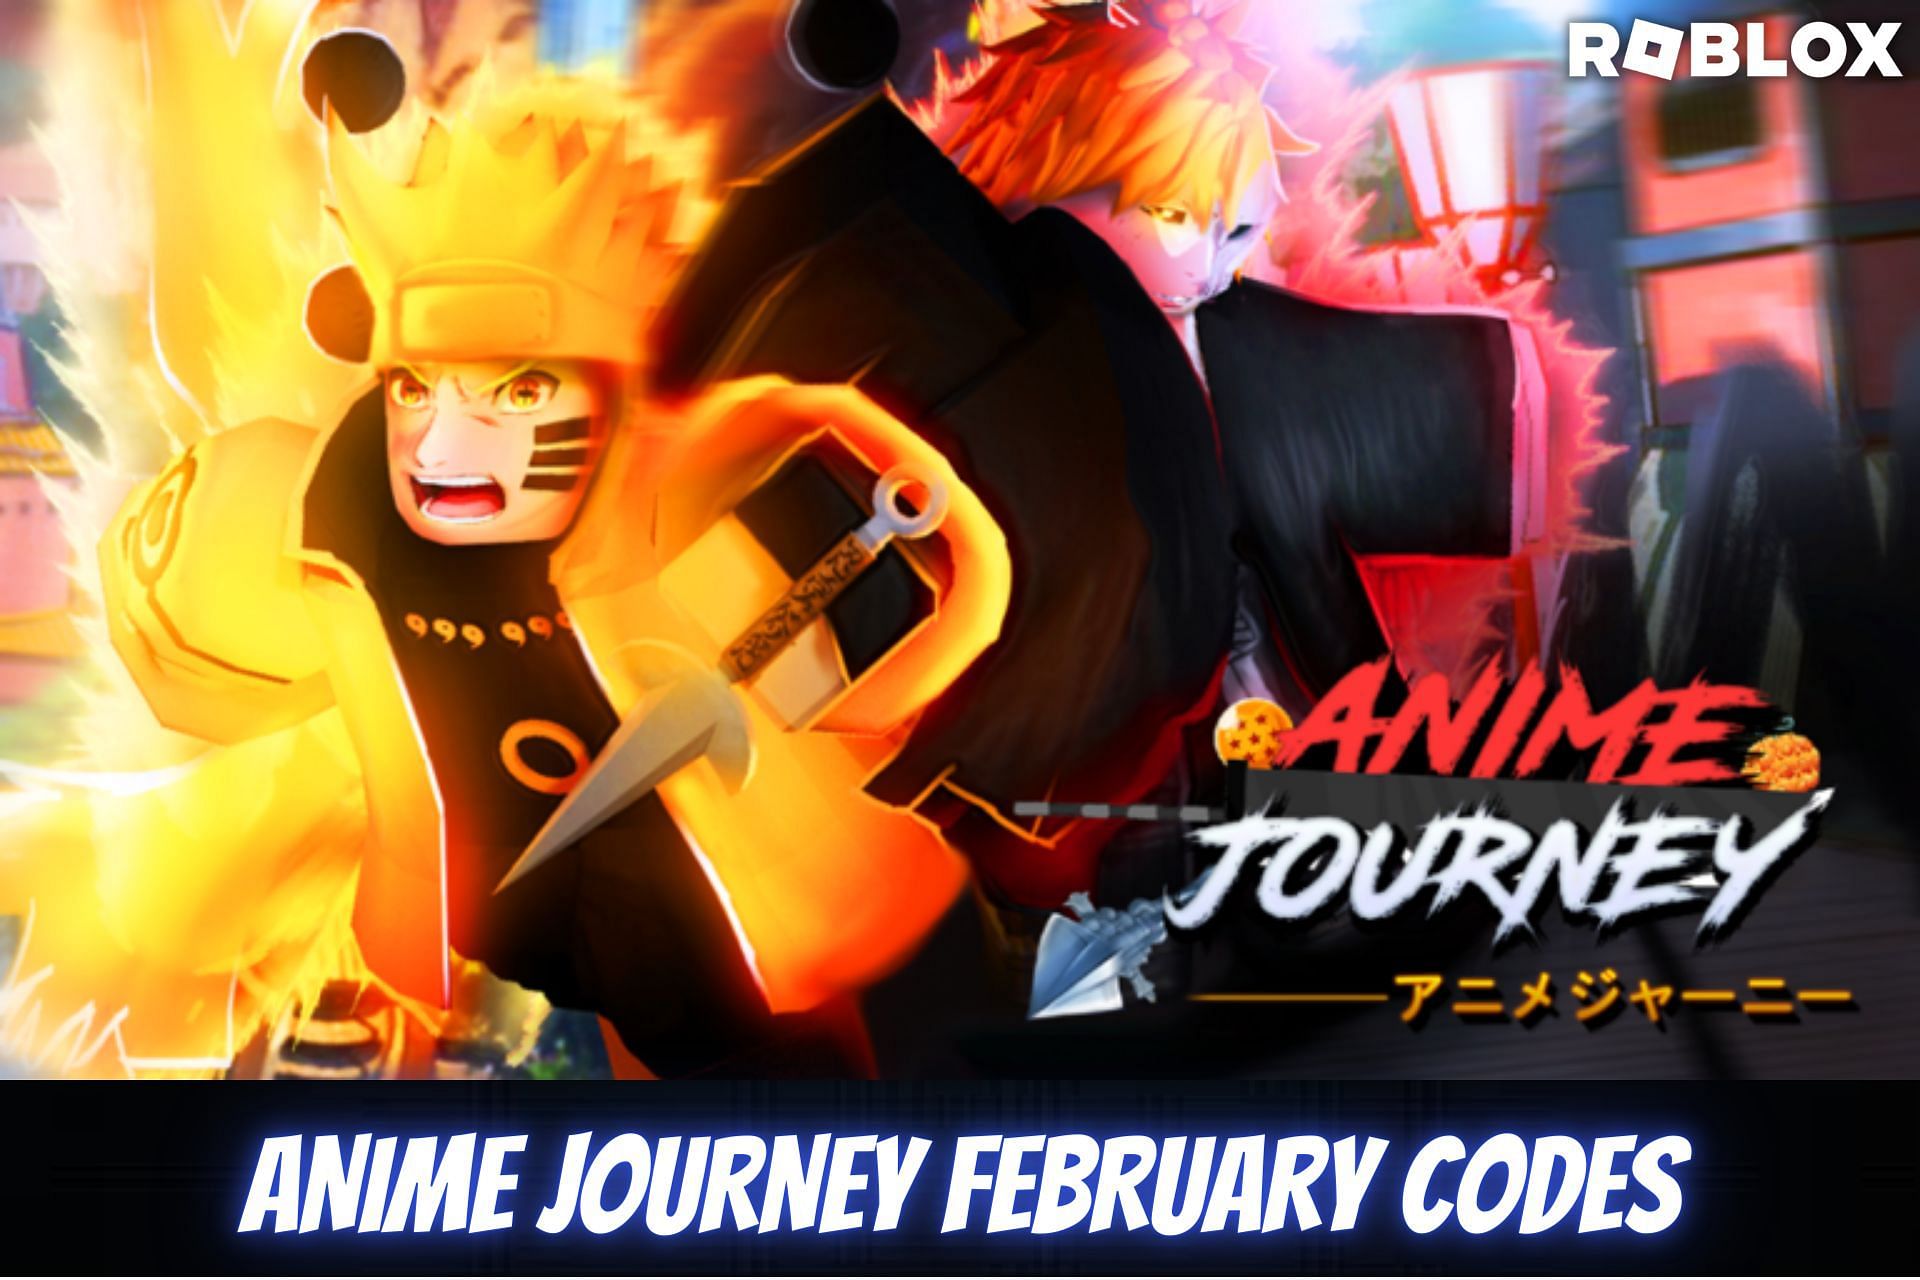 Play with your favorite anime heroes (Image via Roblox)